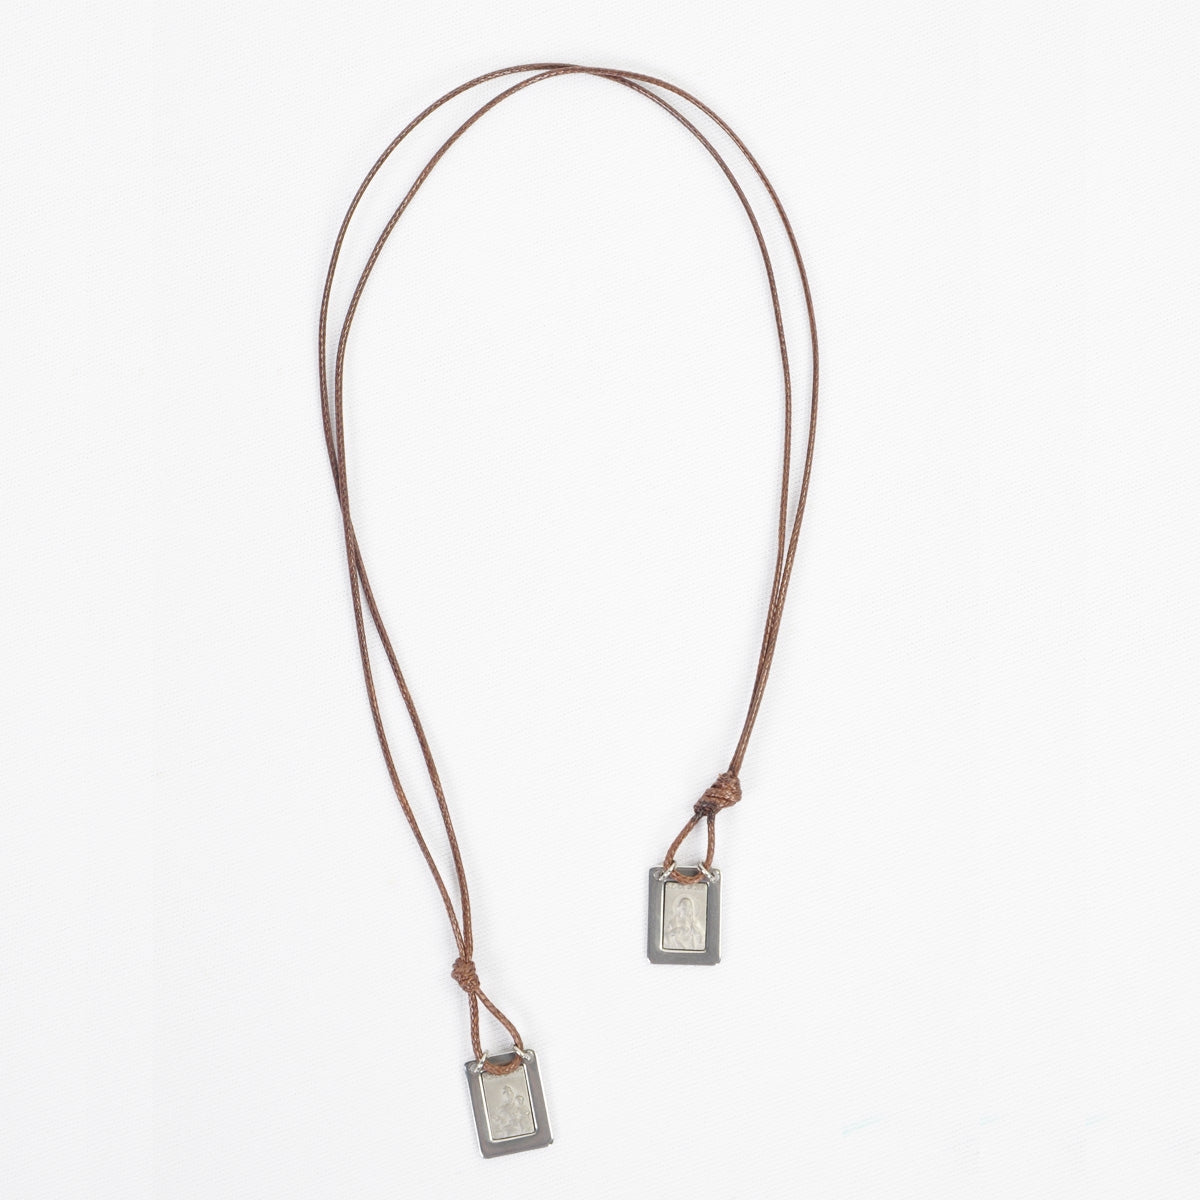 Our Lady of the Carmel Scapular with brown leather cord - Men's Necklace - Male Jewelry